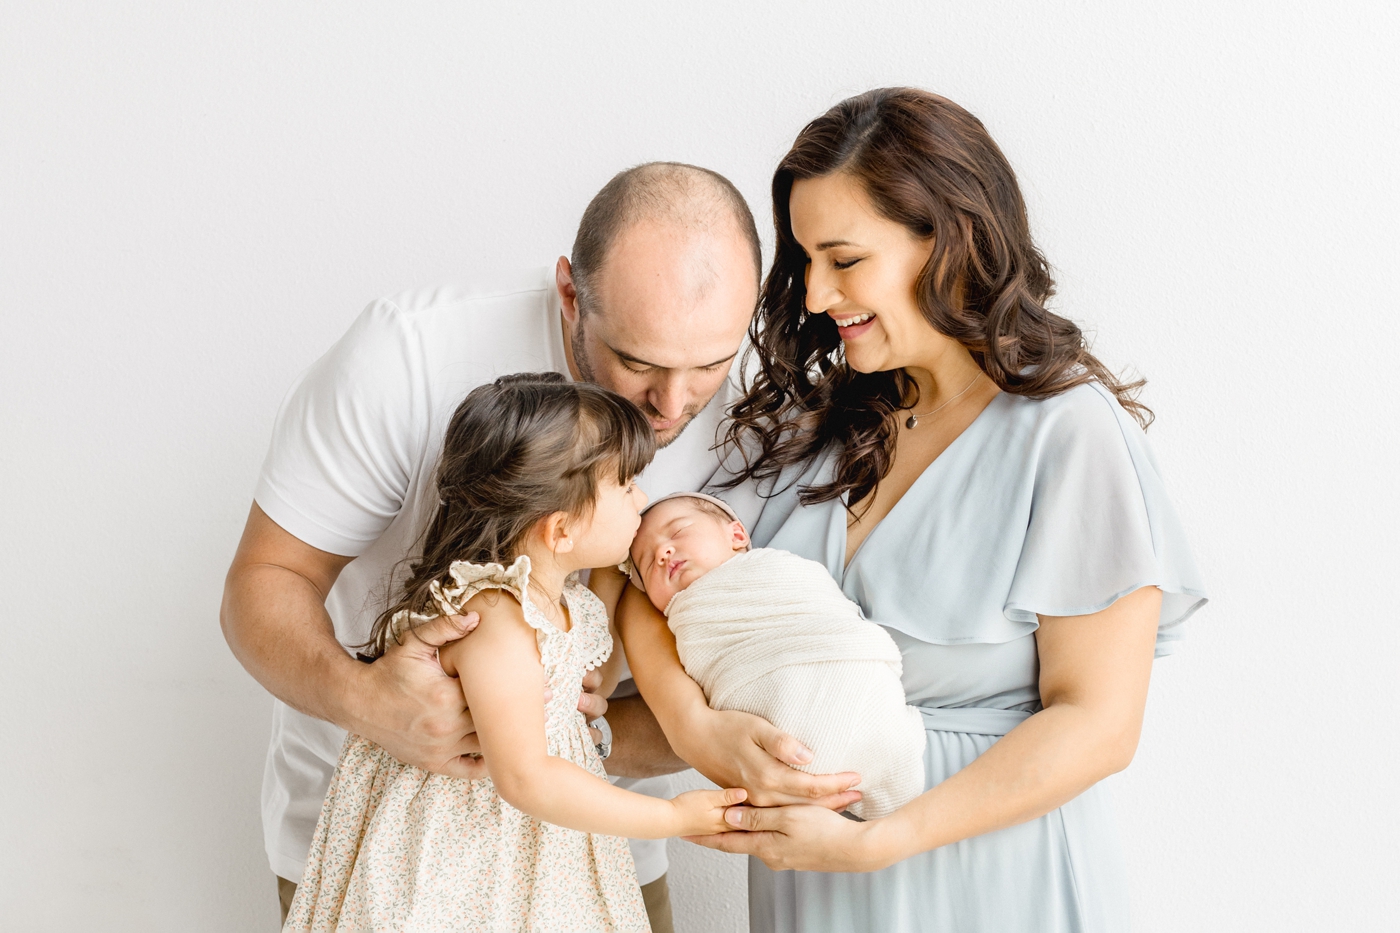 Family of four portrait with big sister kissing baby sister. Photo by Cedar Park newborn photographer, Sana Ahmed Photography.